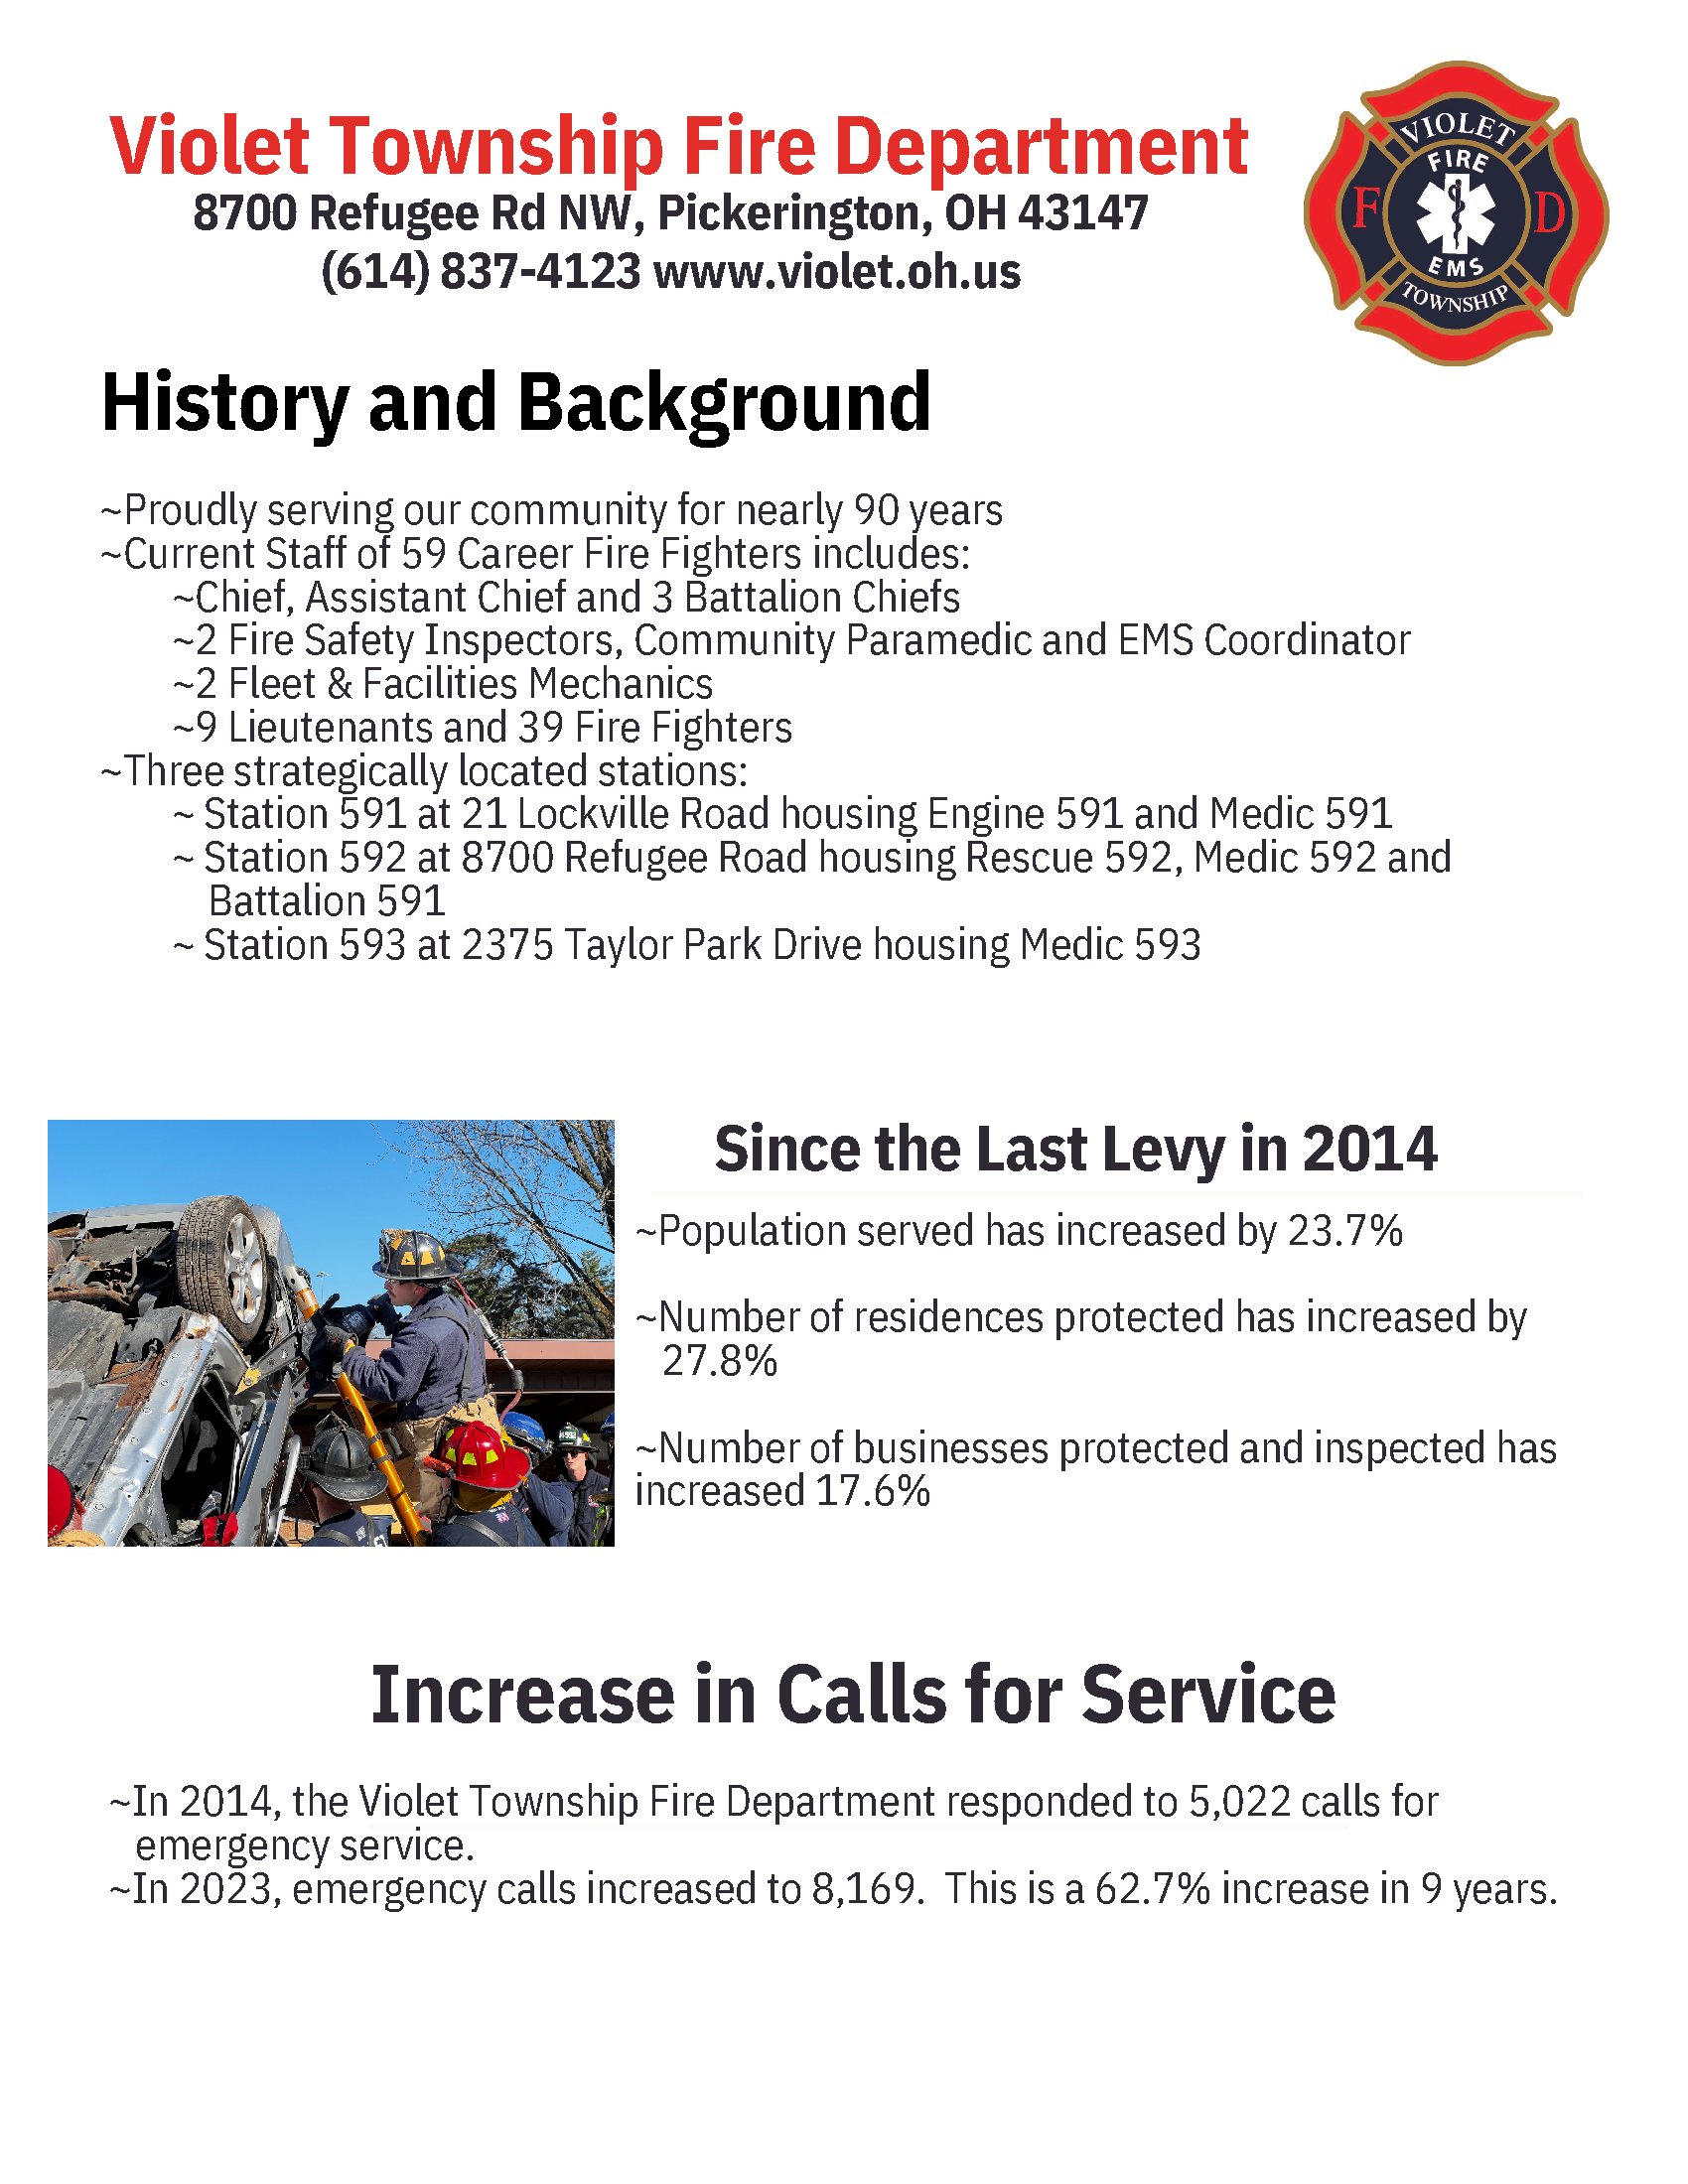 vtfd handout for fire levy  - FINAL_Page_1